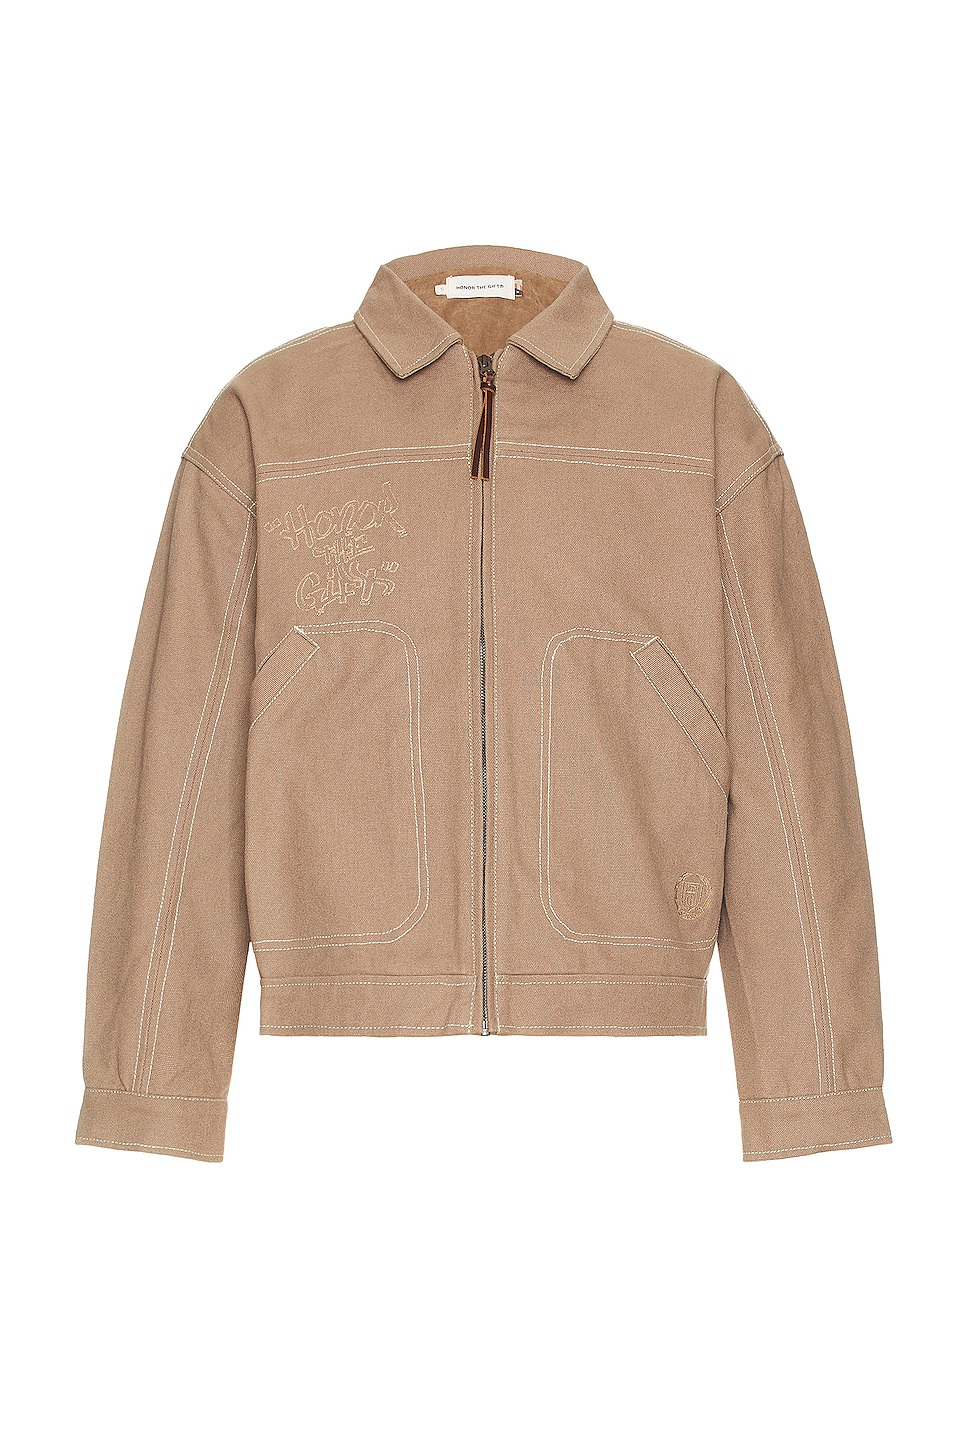 Image 1 of Honor The Gift Script Carpenter Jacket in Light Brown